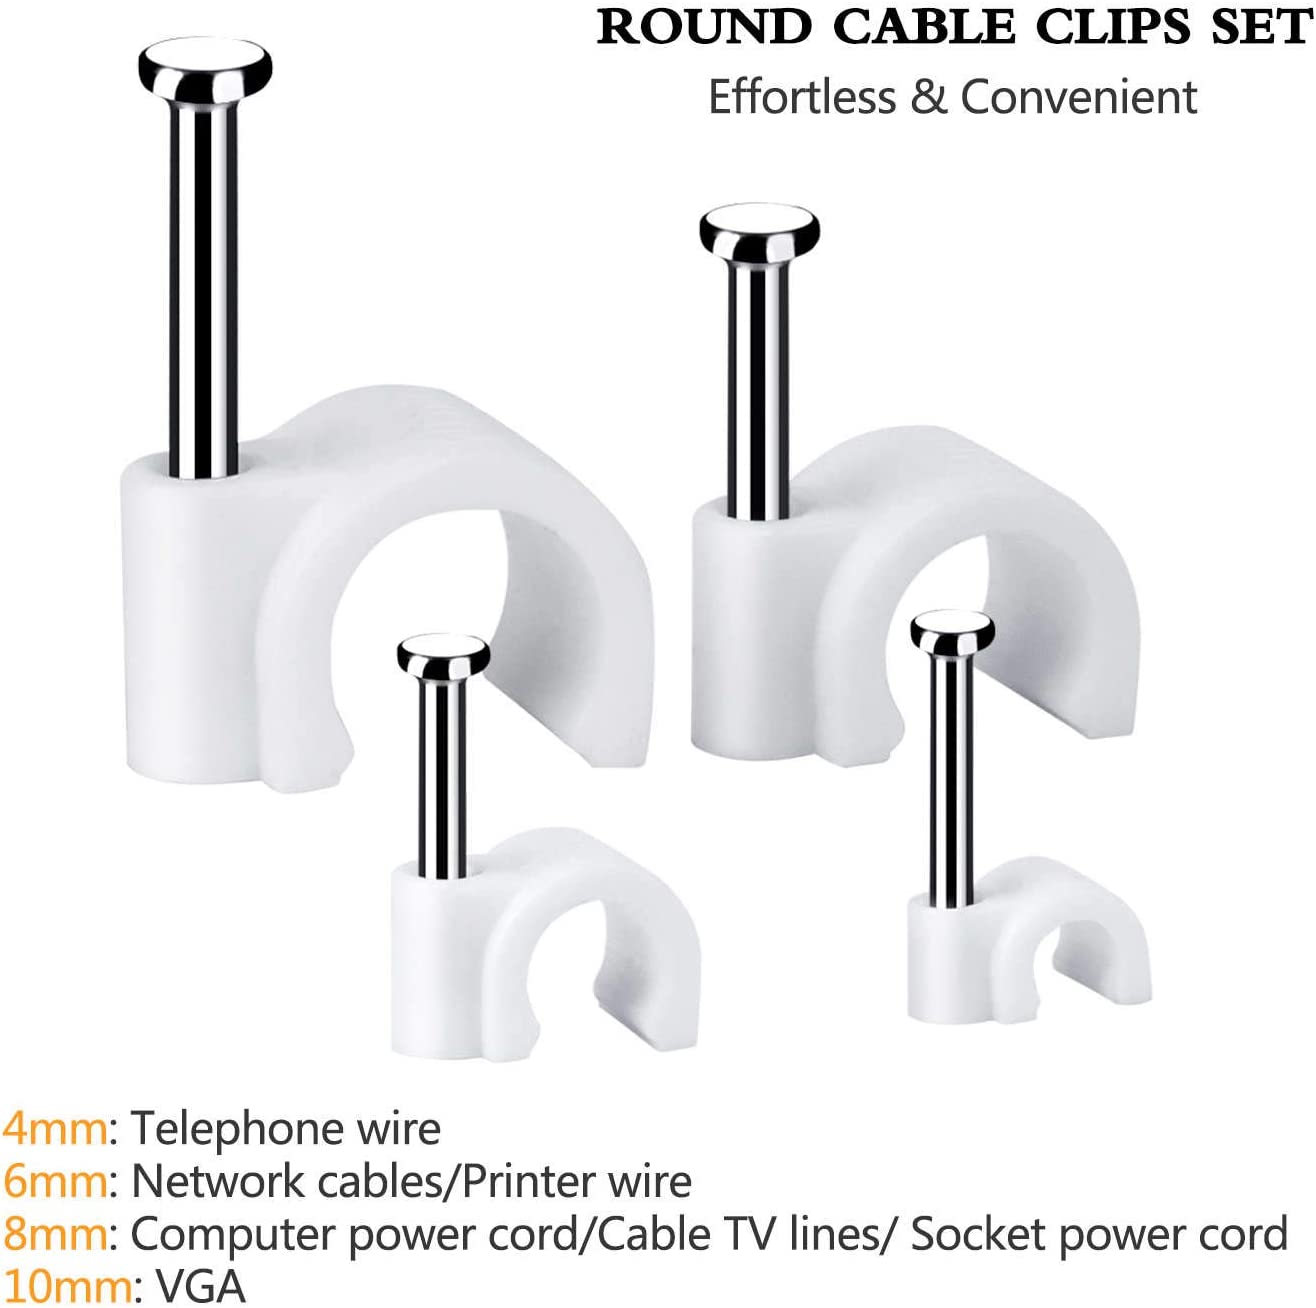 Easytle Cable Wire Clips 4mm 6mm 8mm 10mm (Pack of 200)Cable Management RG6 RG59 CAT5 CAT6 RJ45 Electrical Ethernet Dish TV Speaker Wire Cord Tie Holder Single Coaxial Nail Clamps